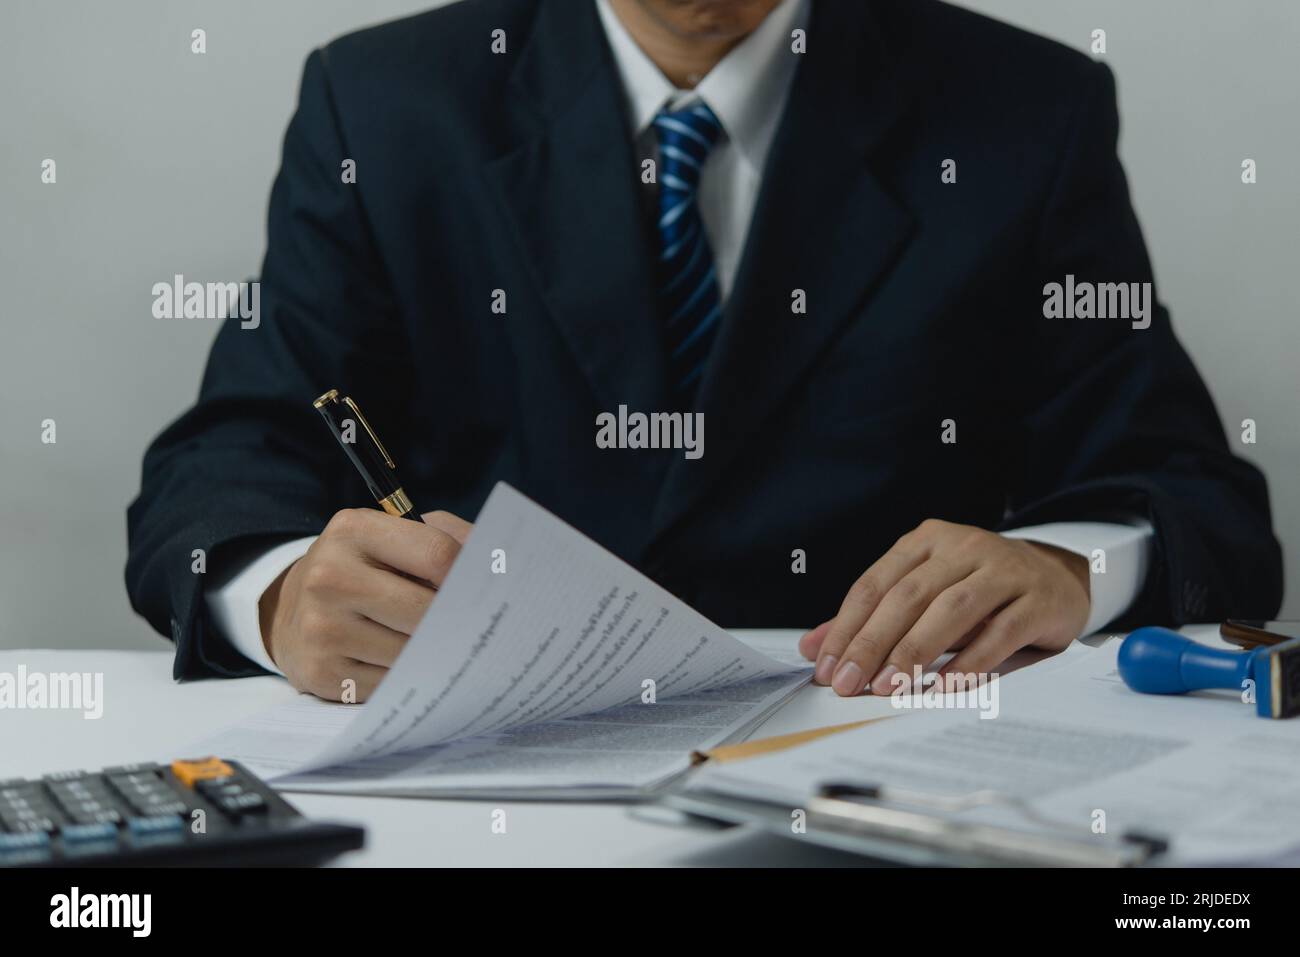 Businessperson checking and reviewing business documents financial reports, accounting sheets, and investment portfolios. paperwork lawyer contract. Stock Photo